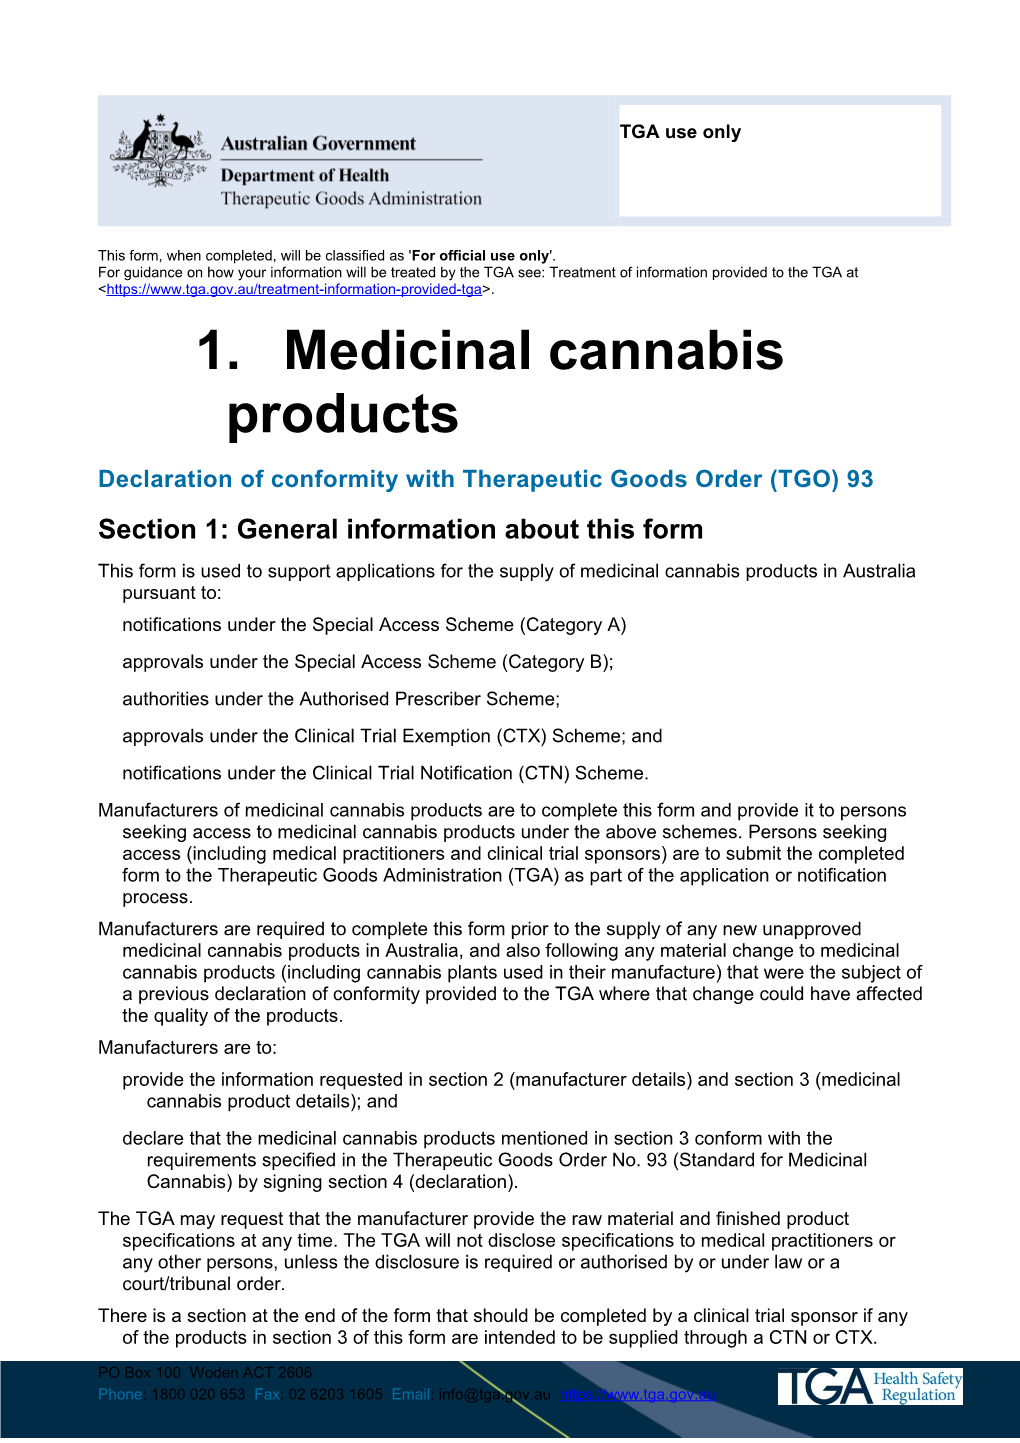 Medicinal Cannabis Products - Declaration of Conformity with Therapeutic Goods Order (TGO) 93